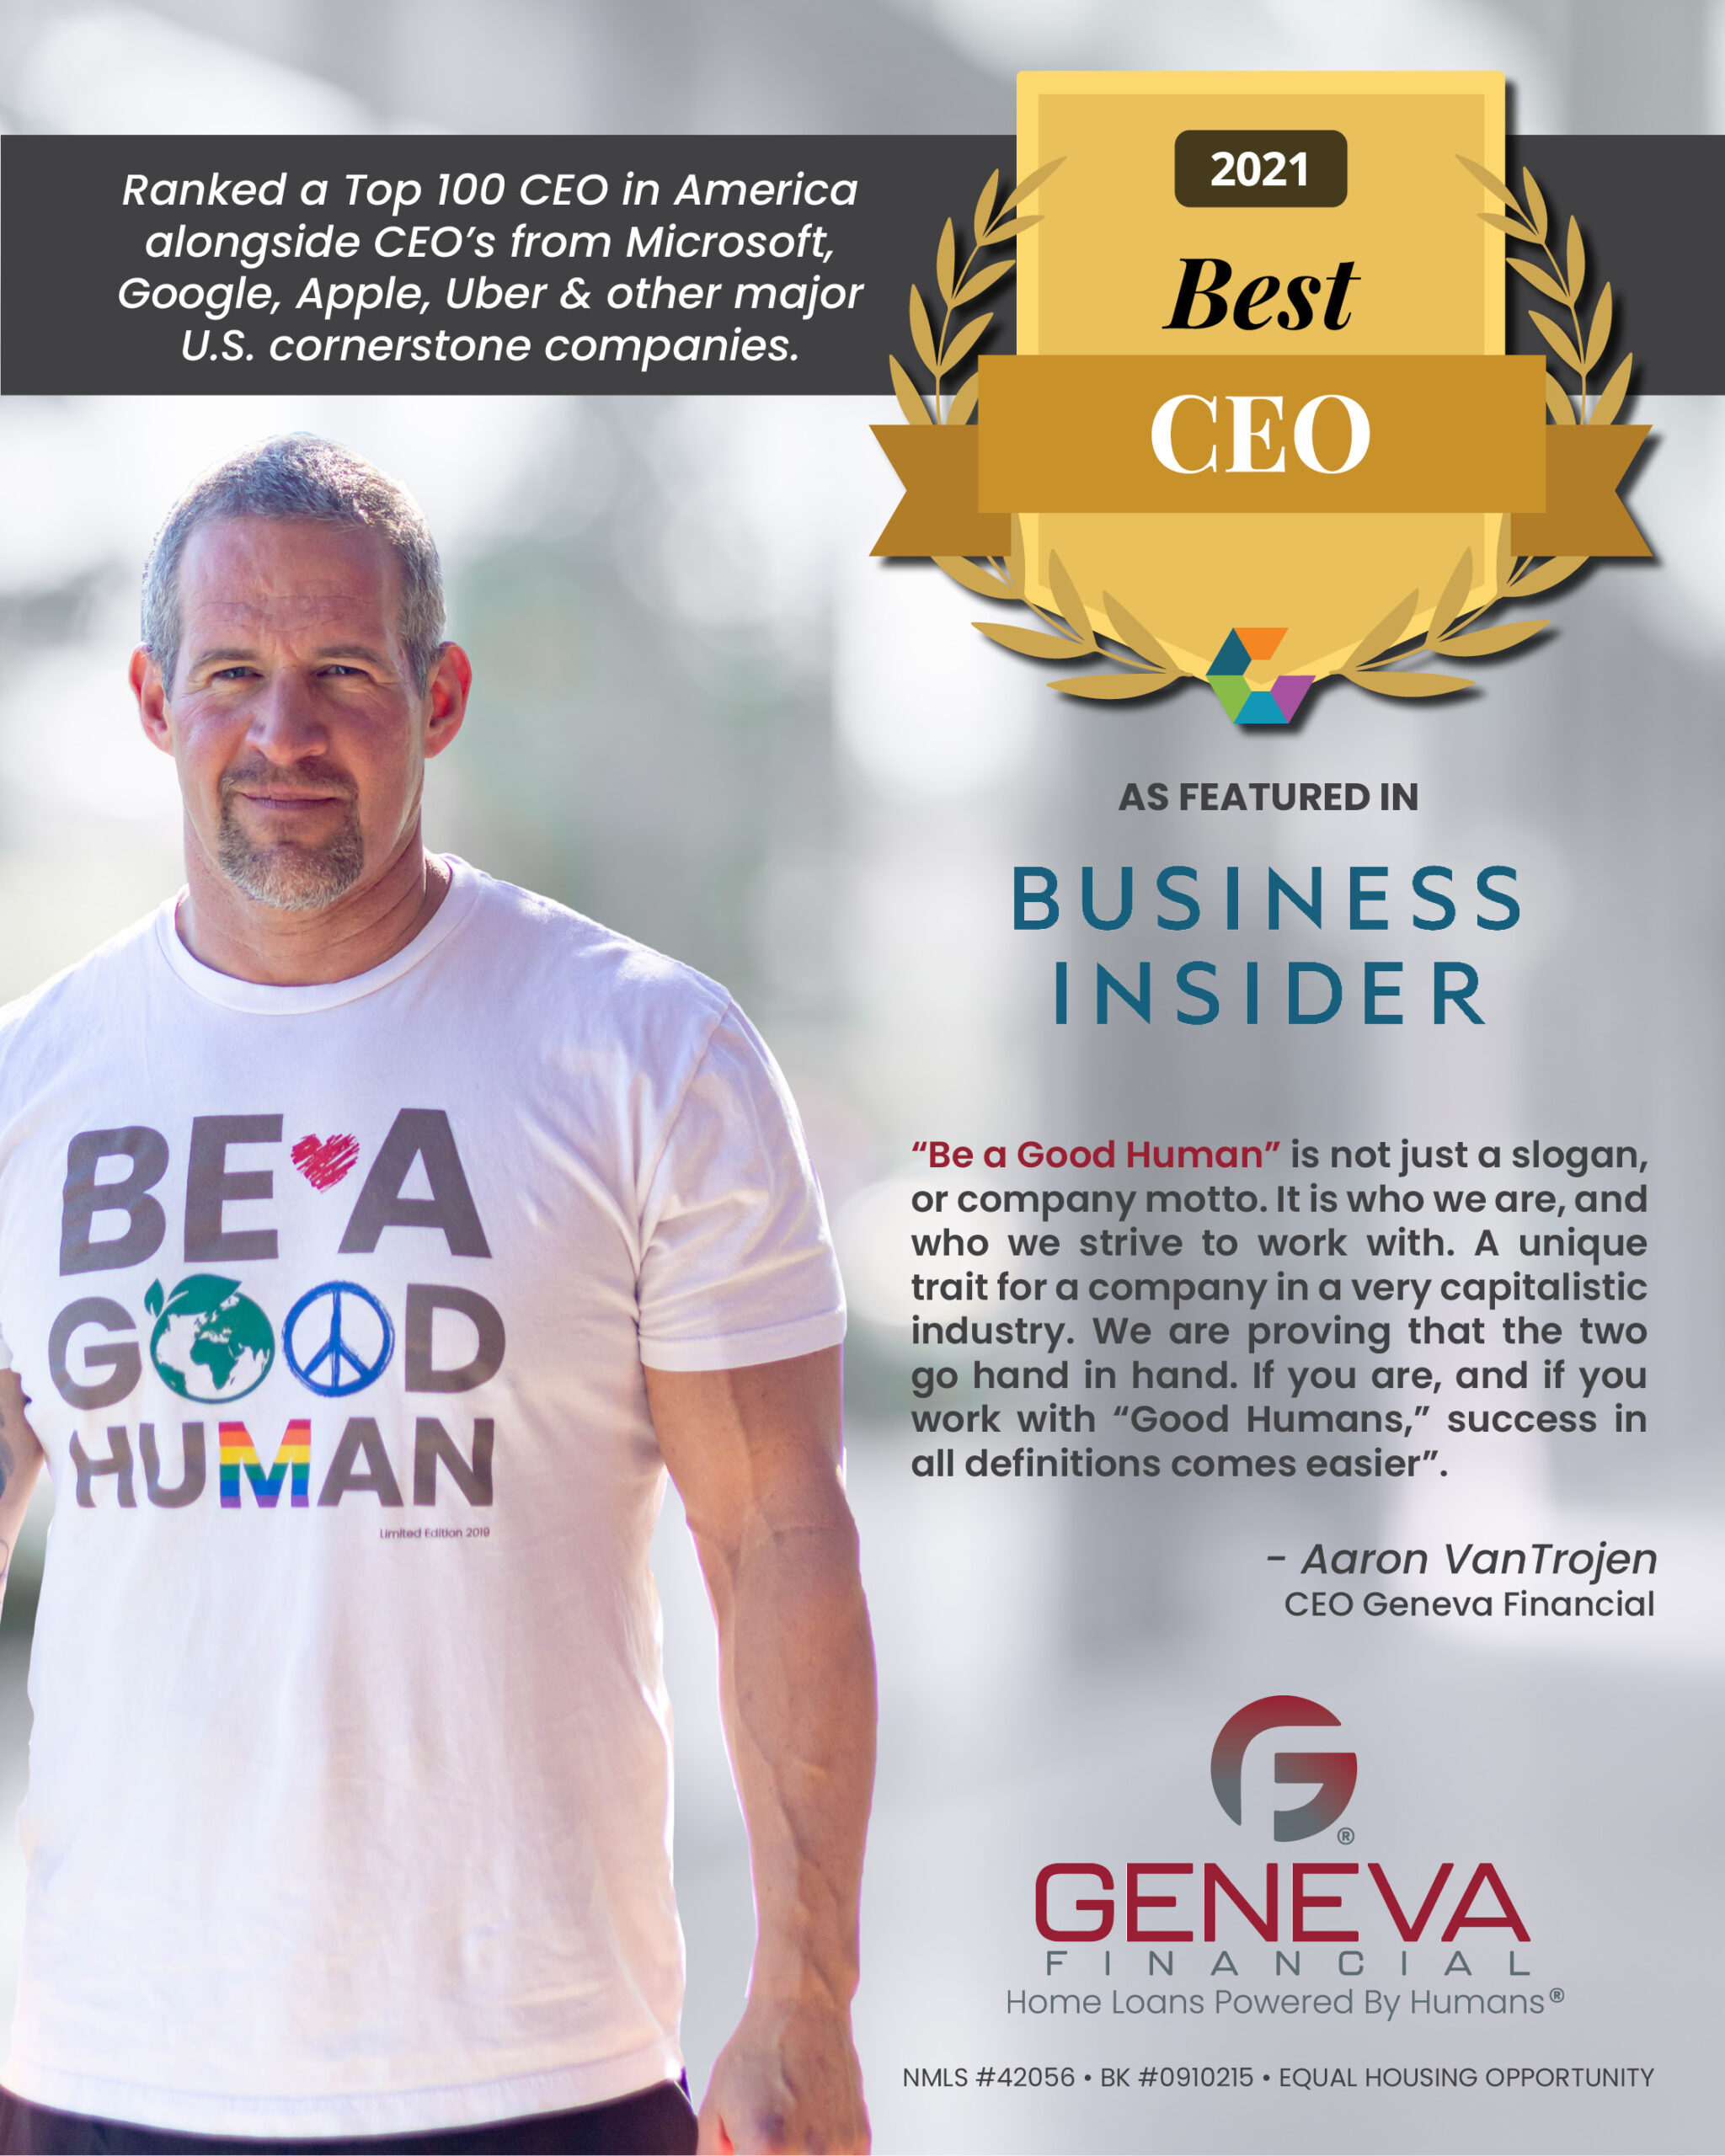 Aaron VanTrojen has been awarded Best CEO and ranked among the Top 100 CEOs of Large Companies in America 2021 list.